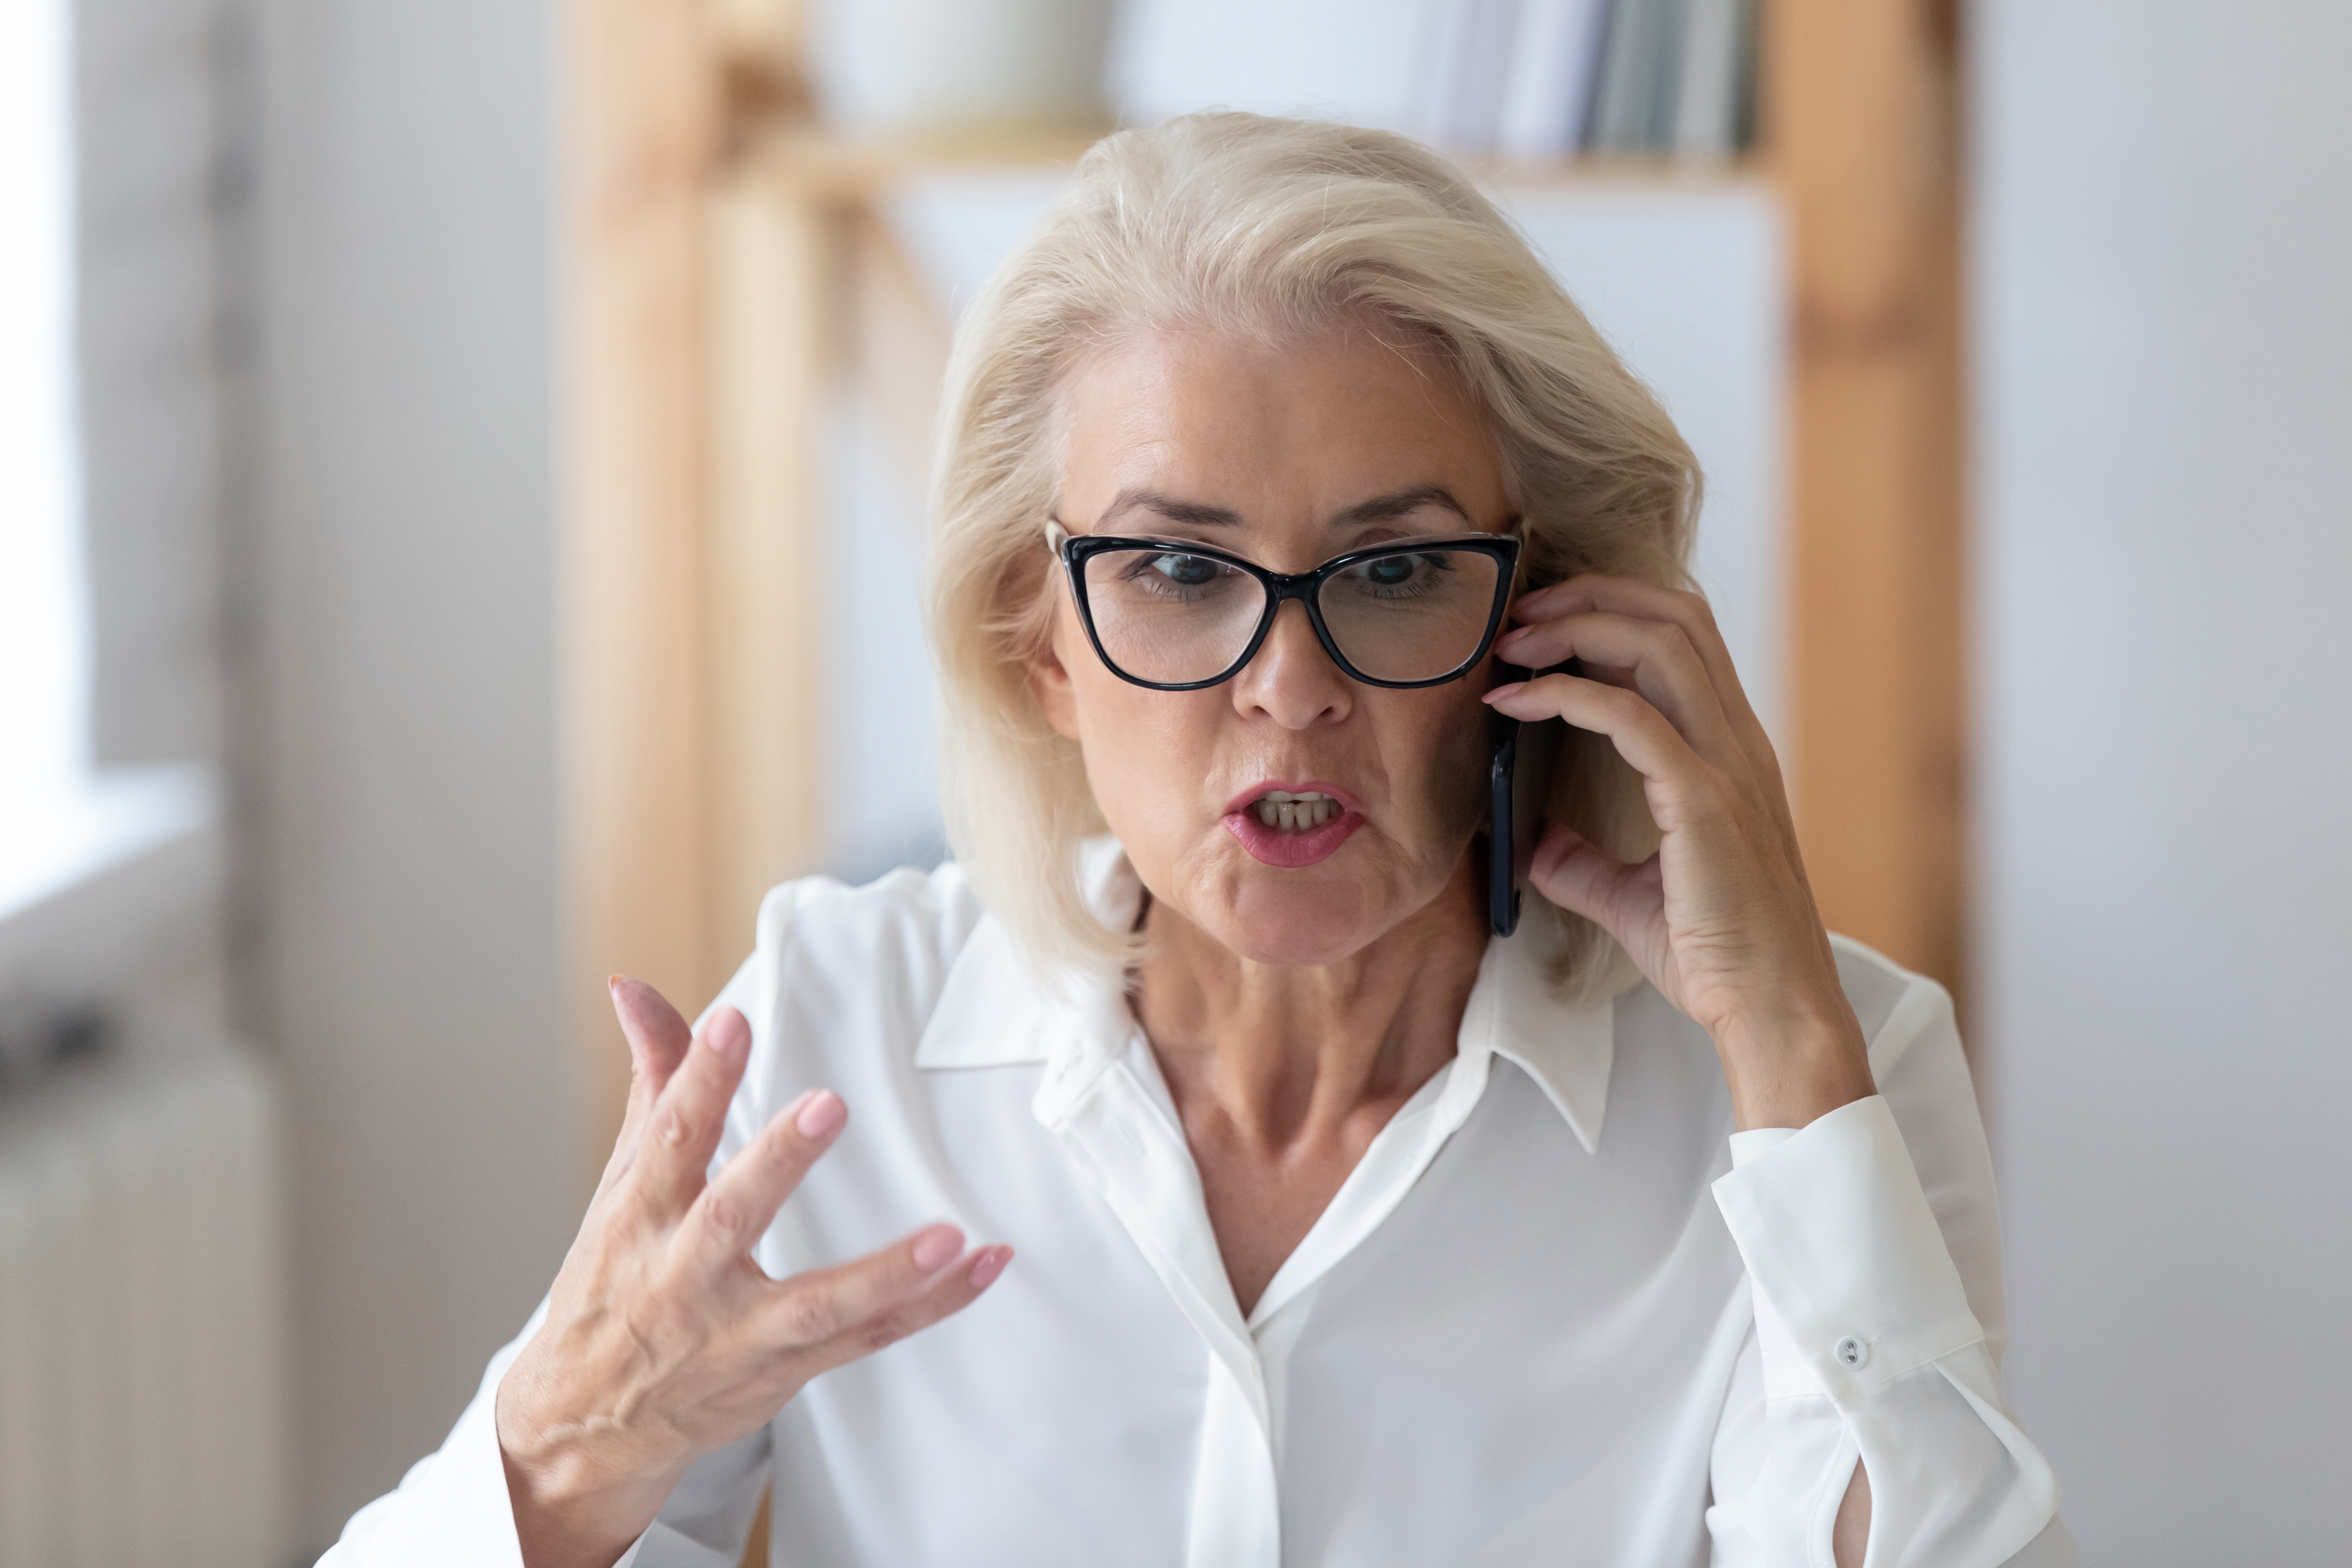 An angry elderly woman on the phone | Source: Shutterstock